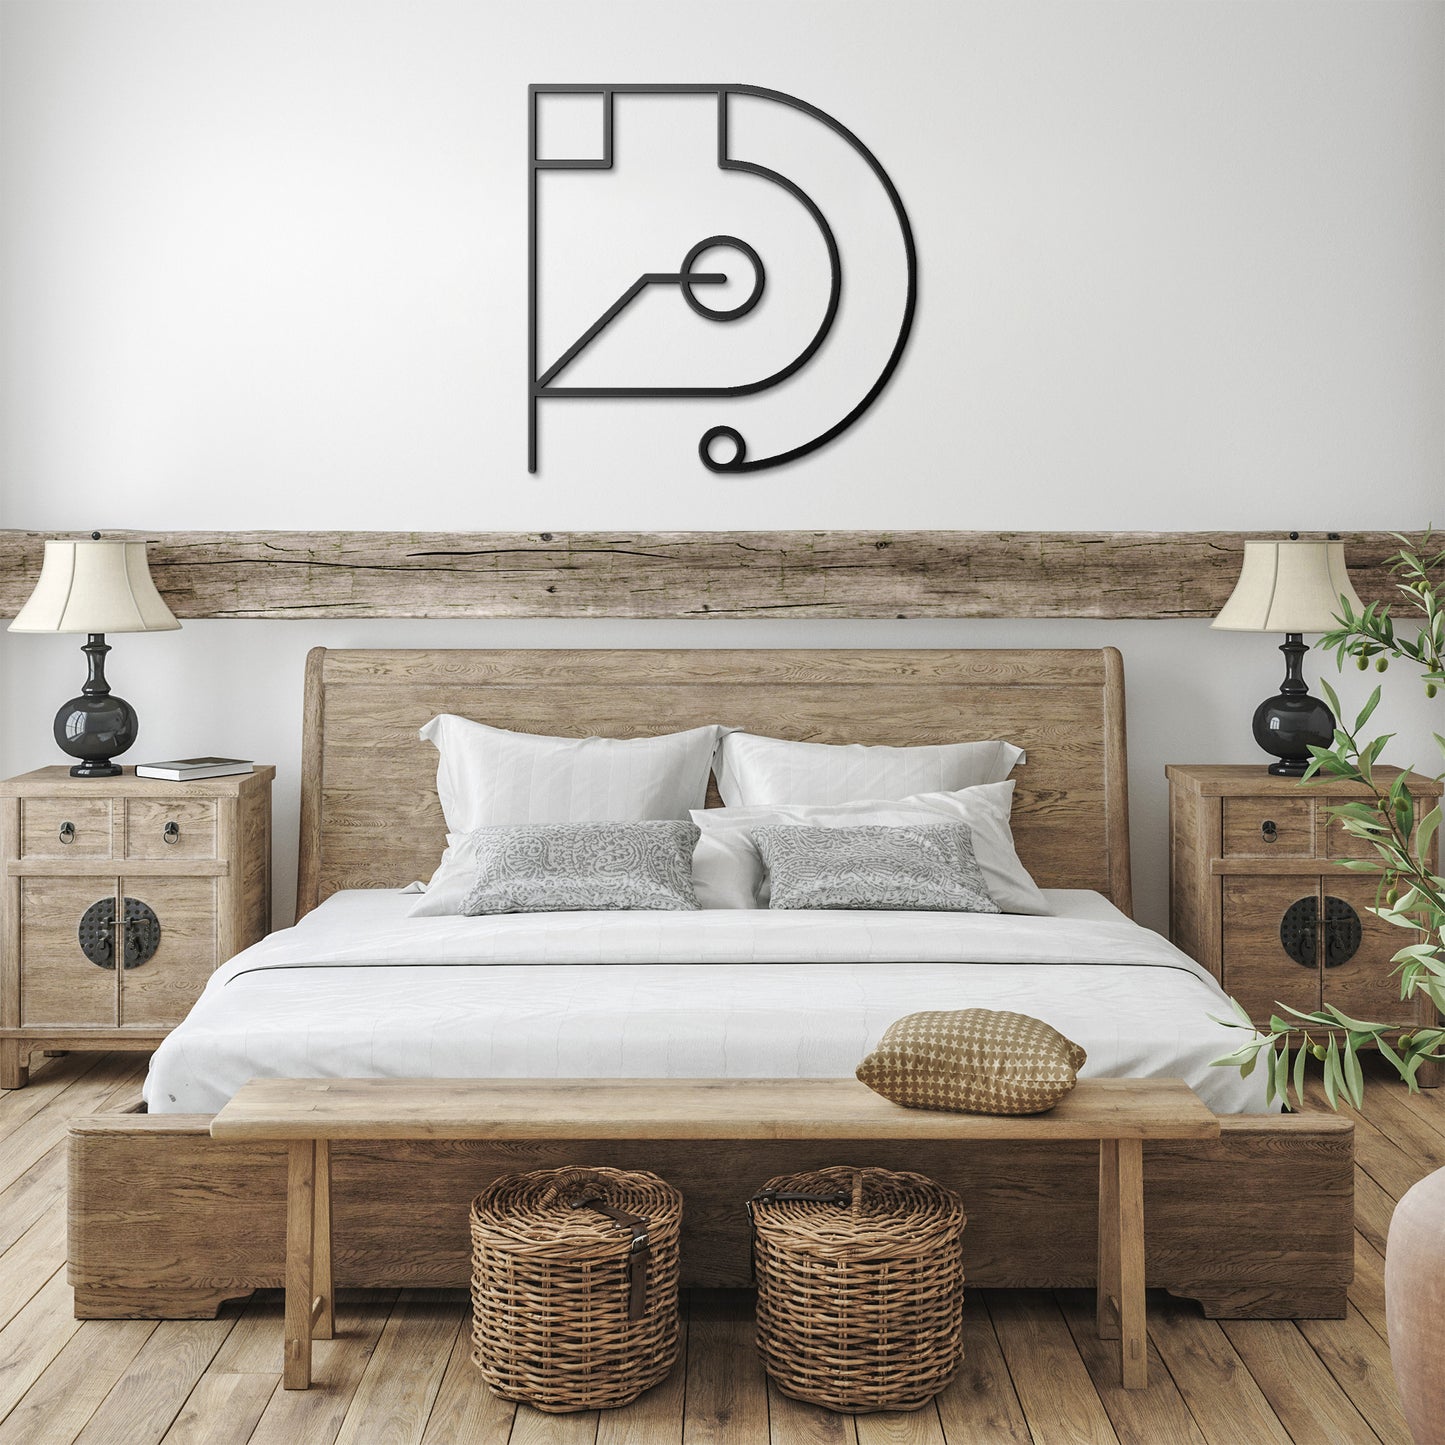 Letter D, Your Initial, Art Deco Letters, Monogram, Metal Signs, Rustic Sign, Wall Art, Wall Decor